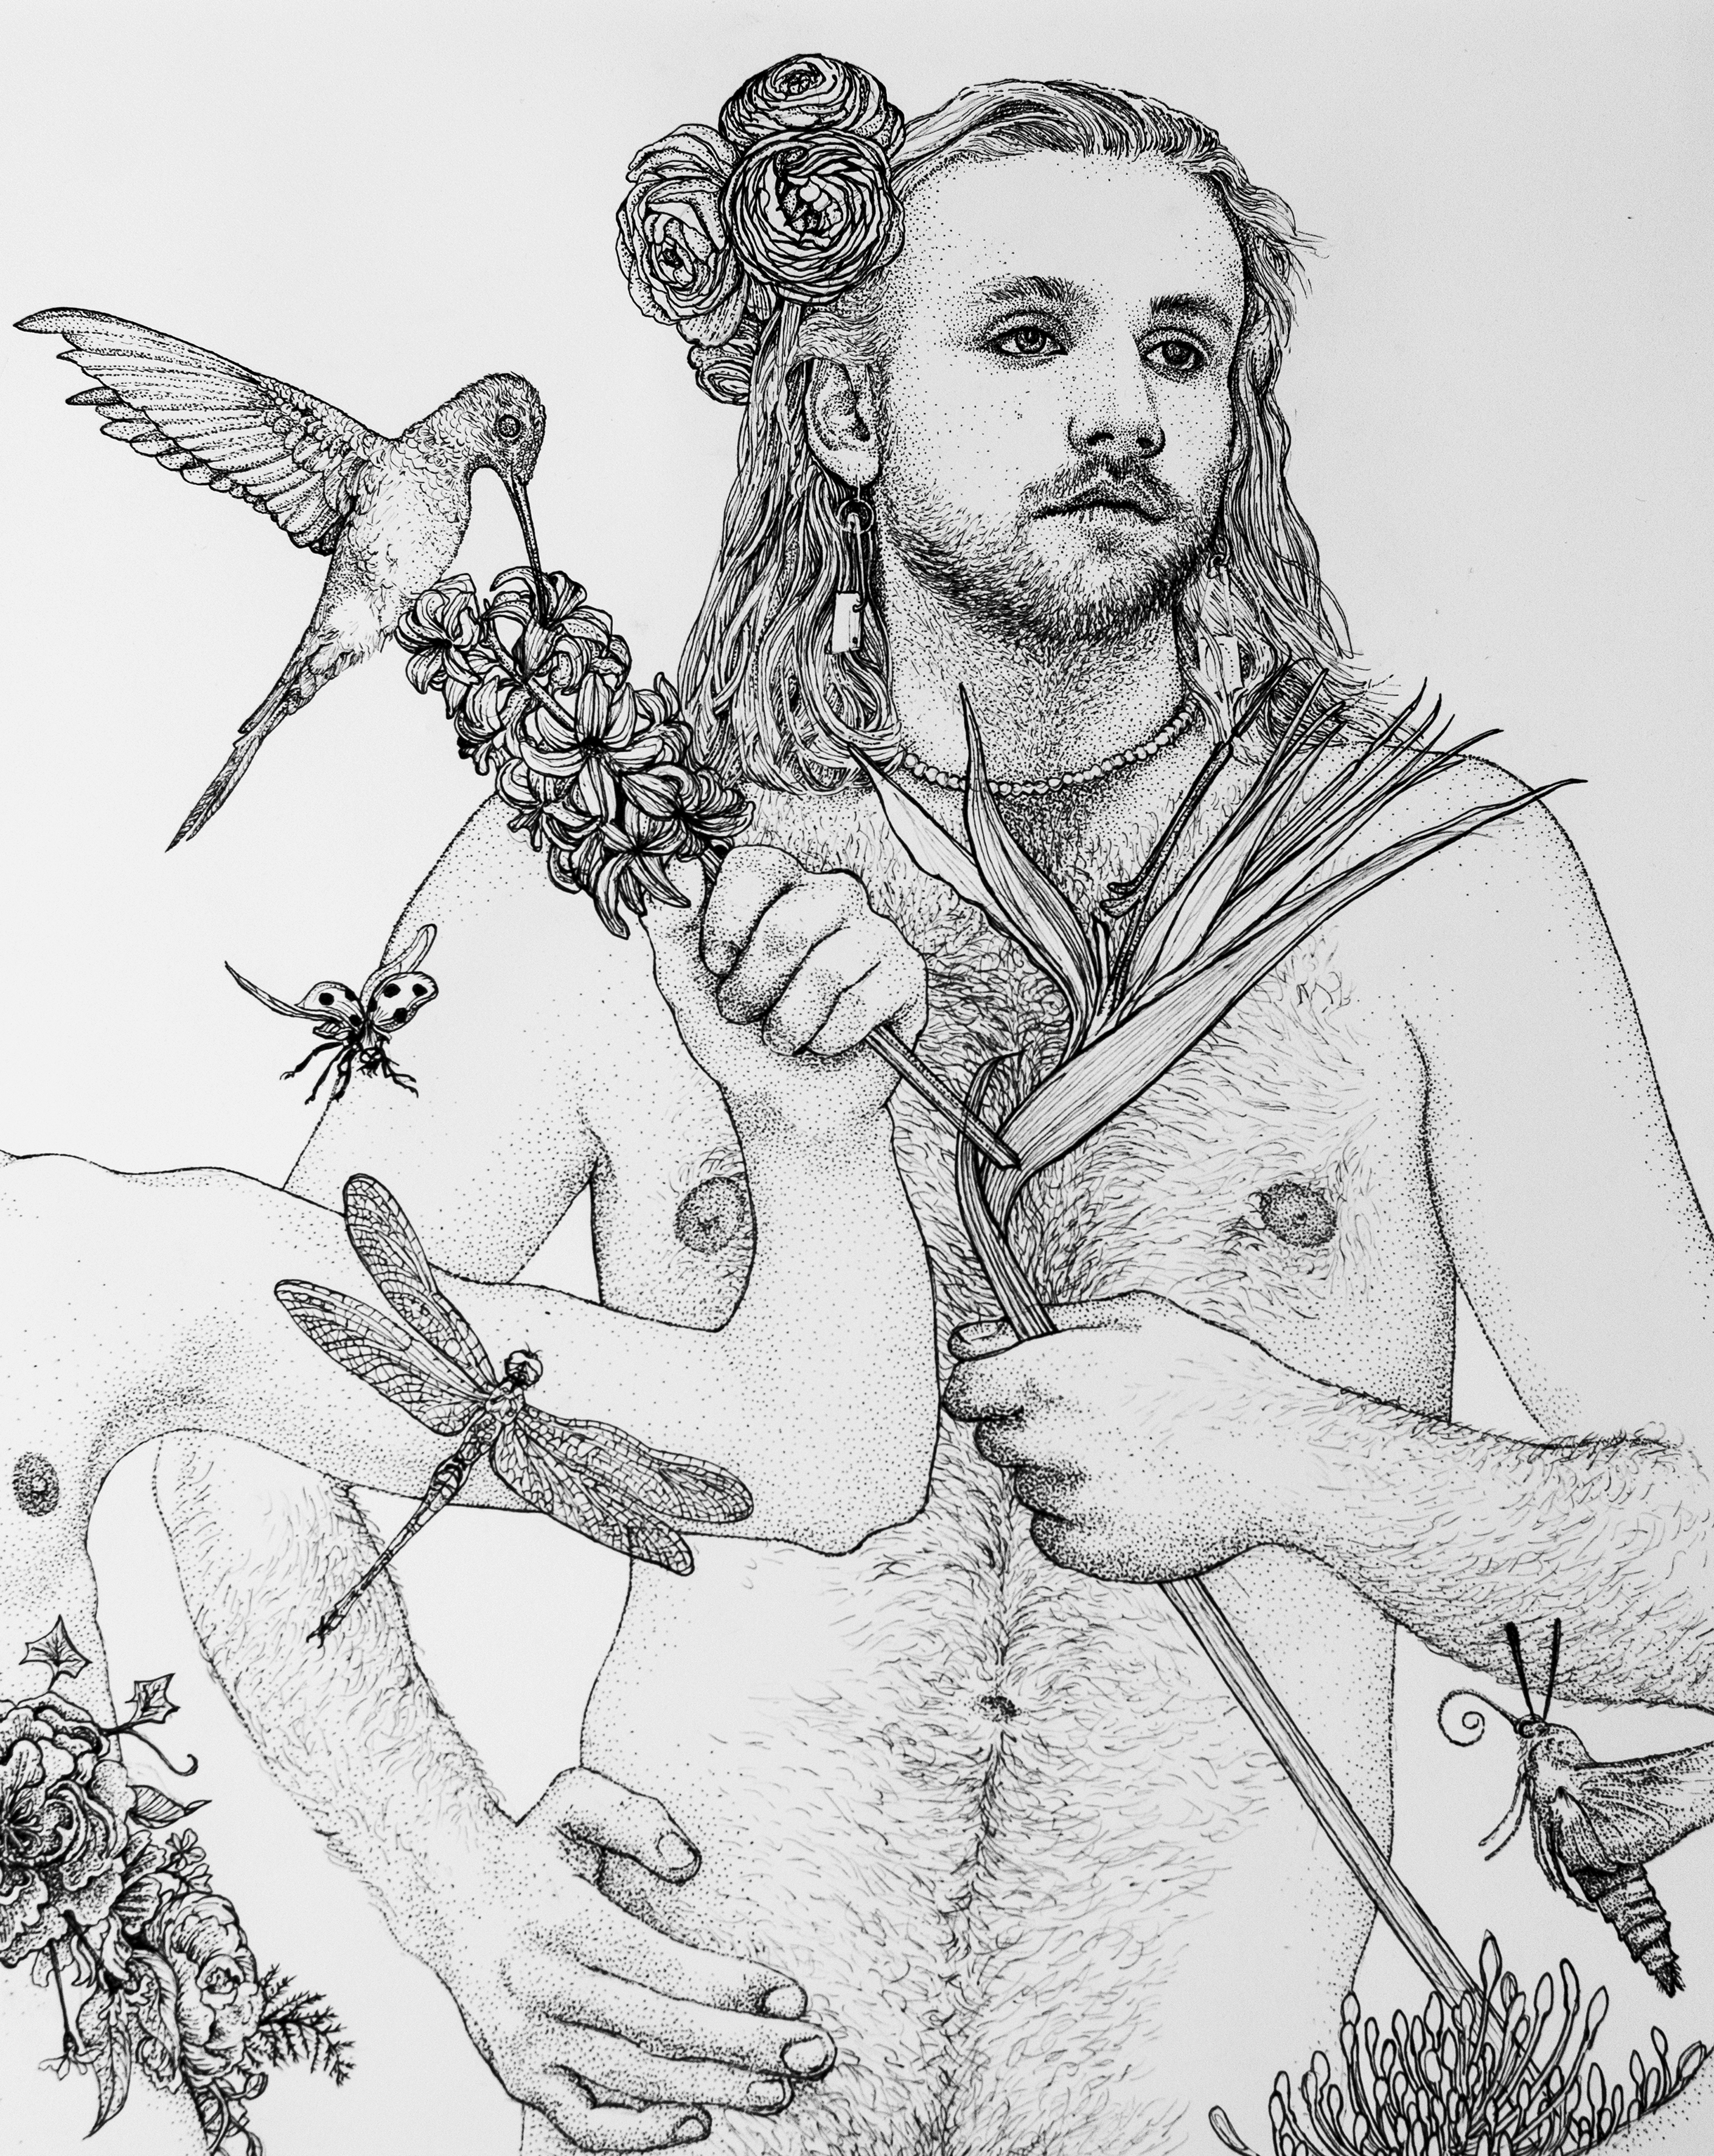 Detail of a drawing titled 'Spring' by Andrew Nicholls, depicting a nude male figure from the waist-up, with a flower in his hair and holding a plant that a hummingbird is on.